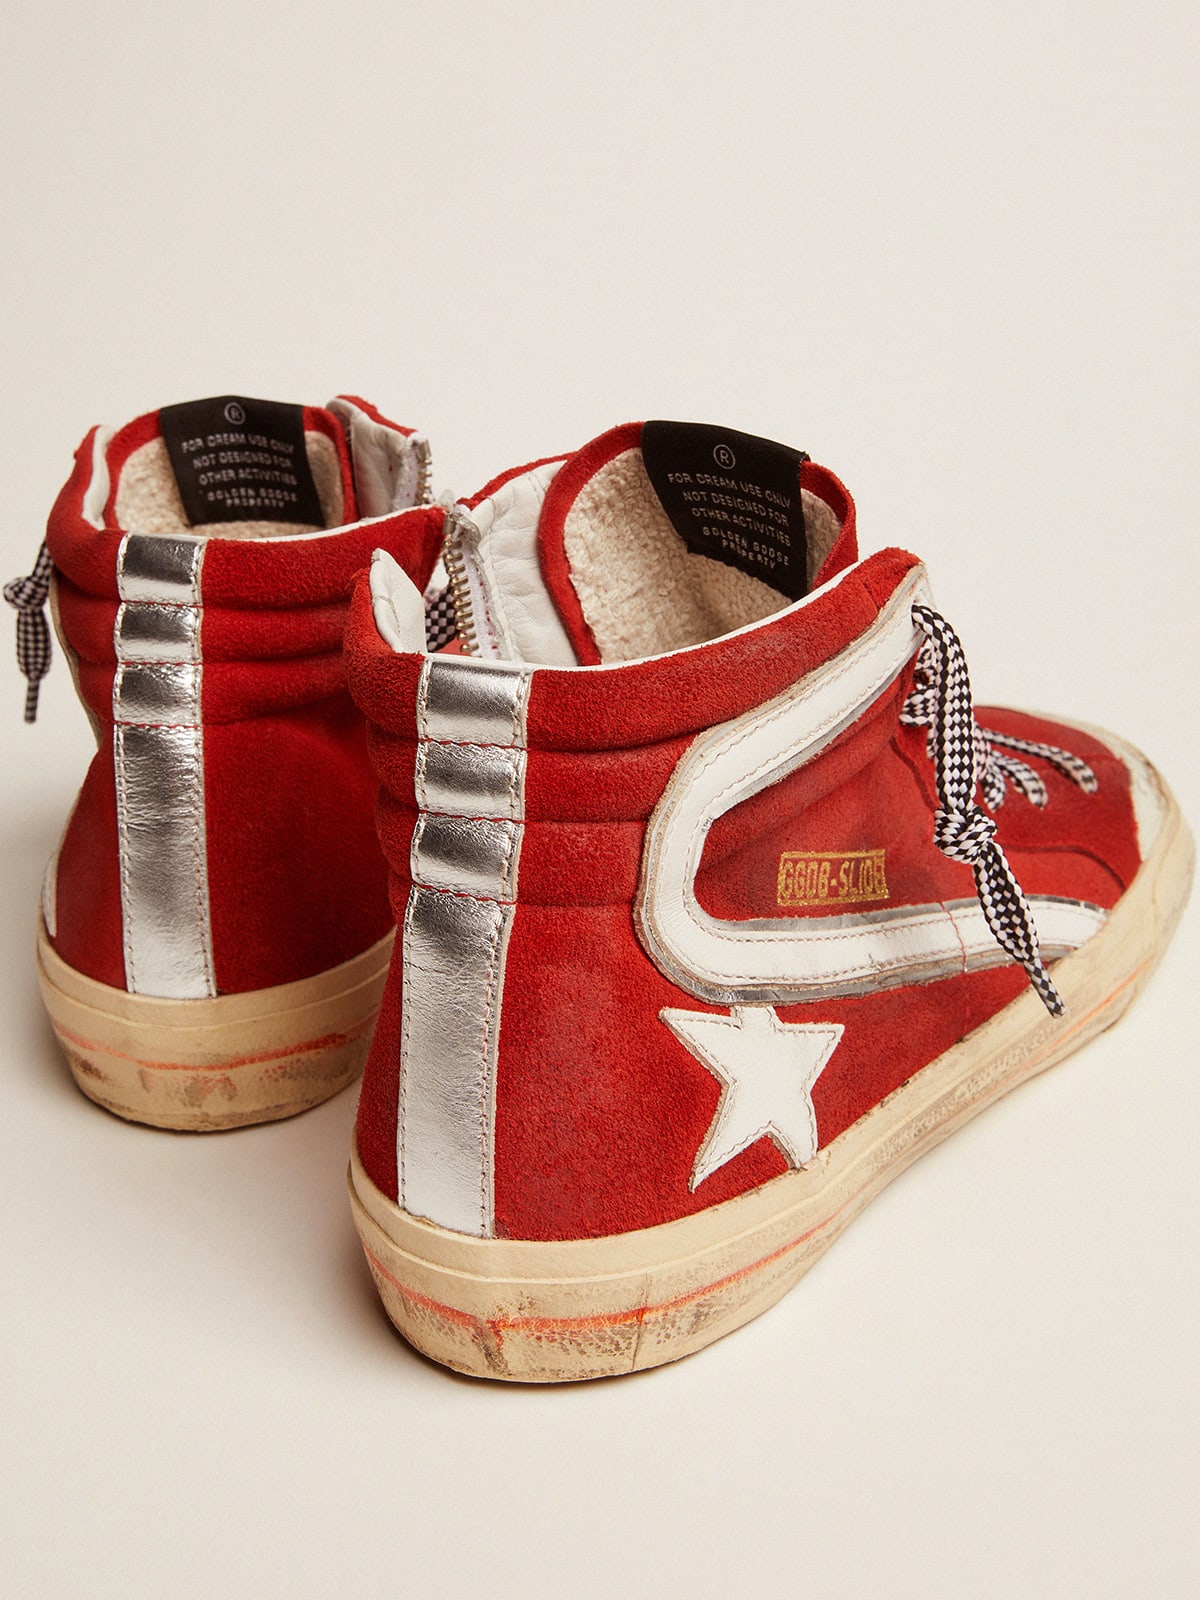 Golden Goose - Penstar Slide sneakers in red suede with white details in 